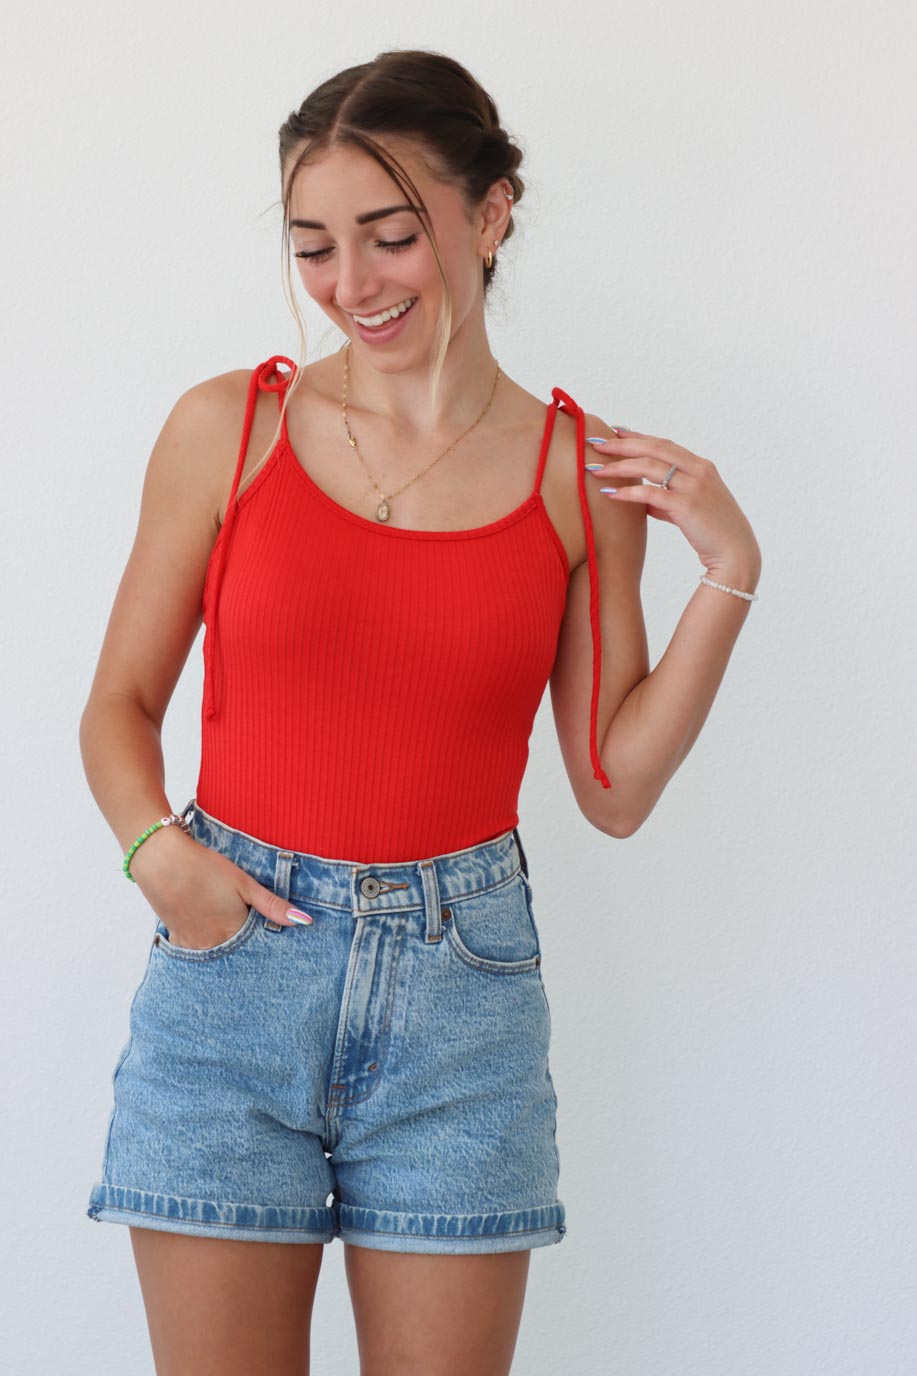 girl wearing red tank top bodysuit with tie straps